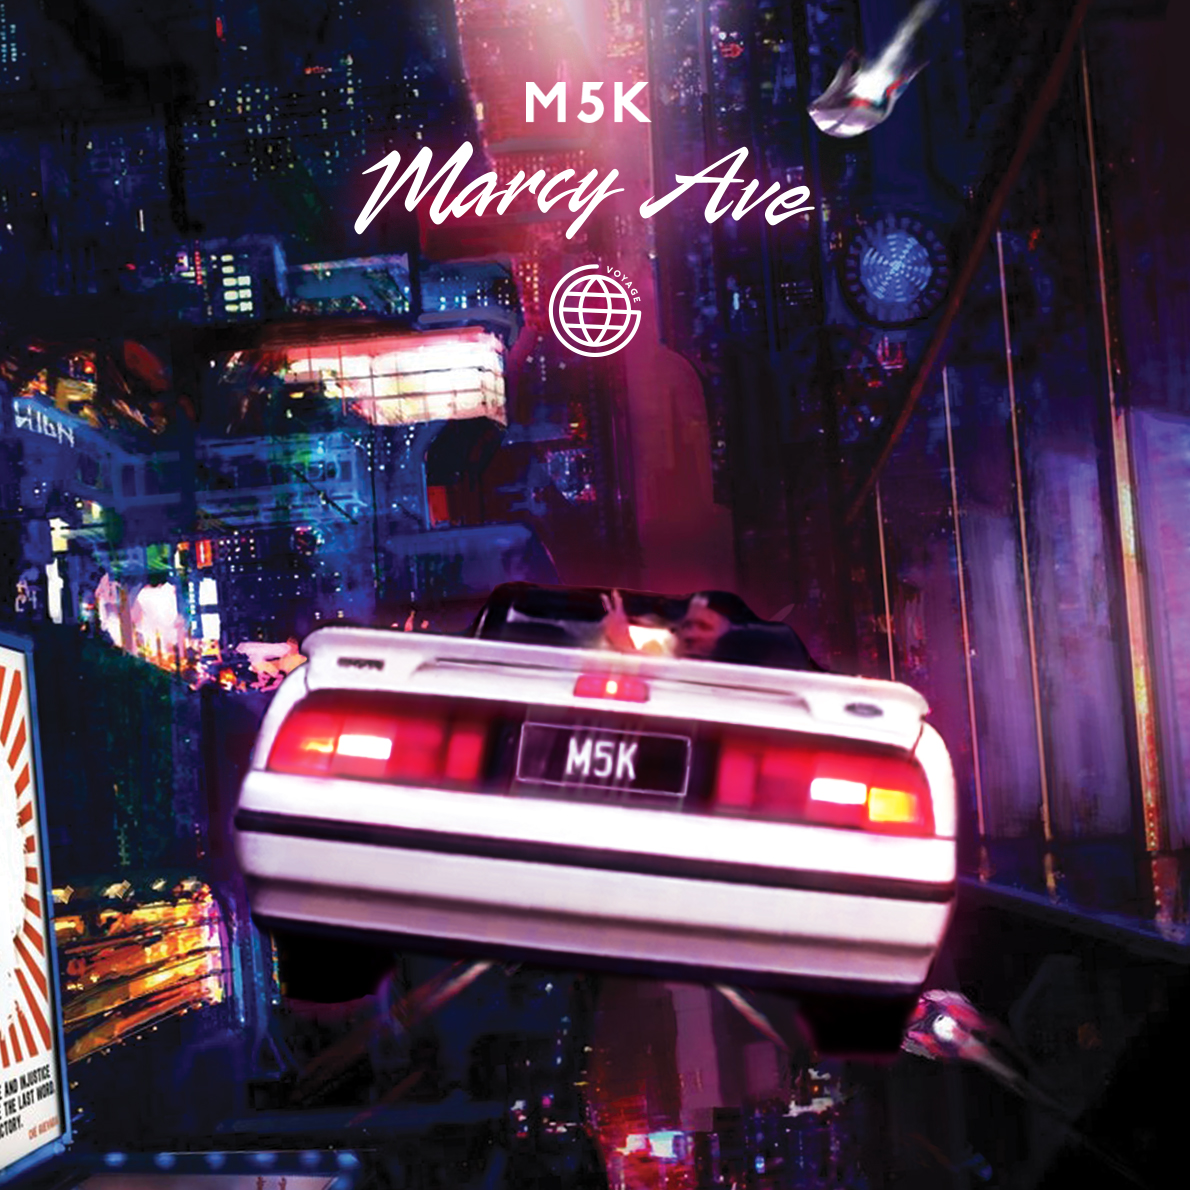 M5K - Marcy Ave